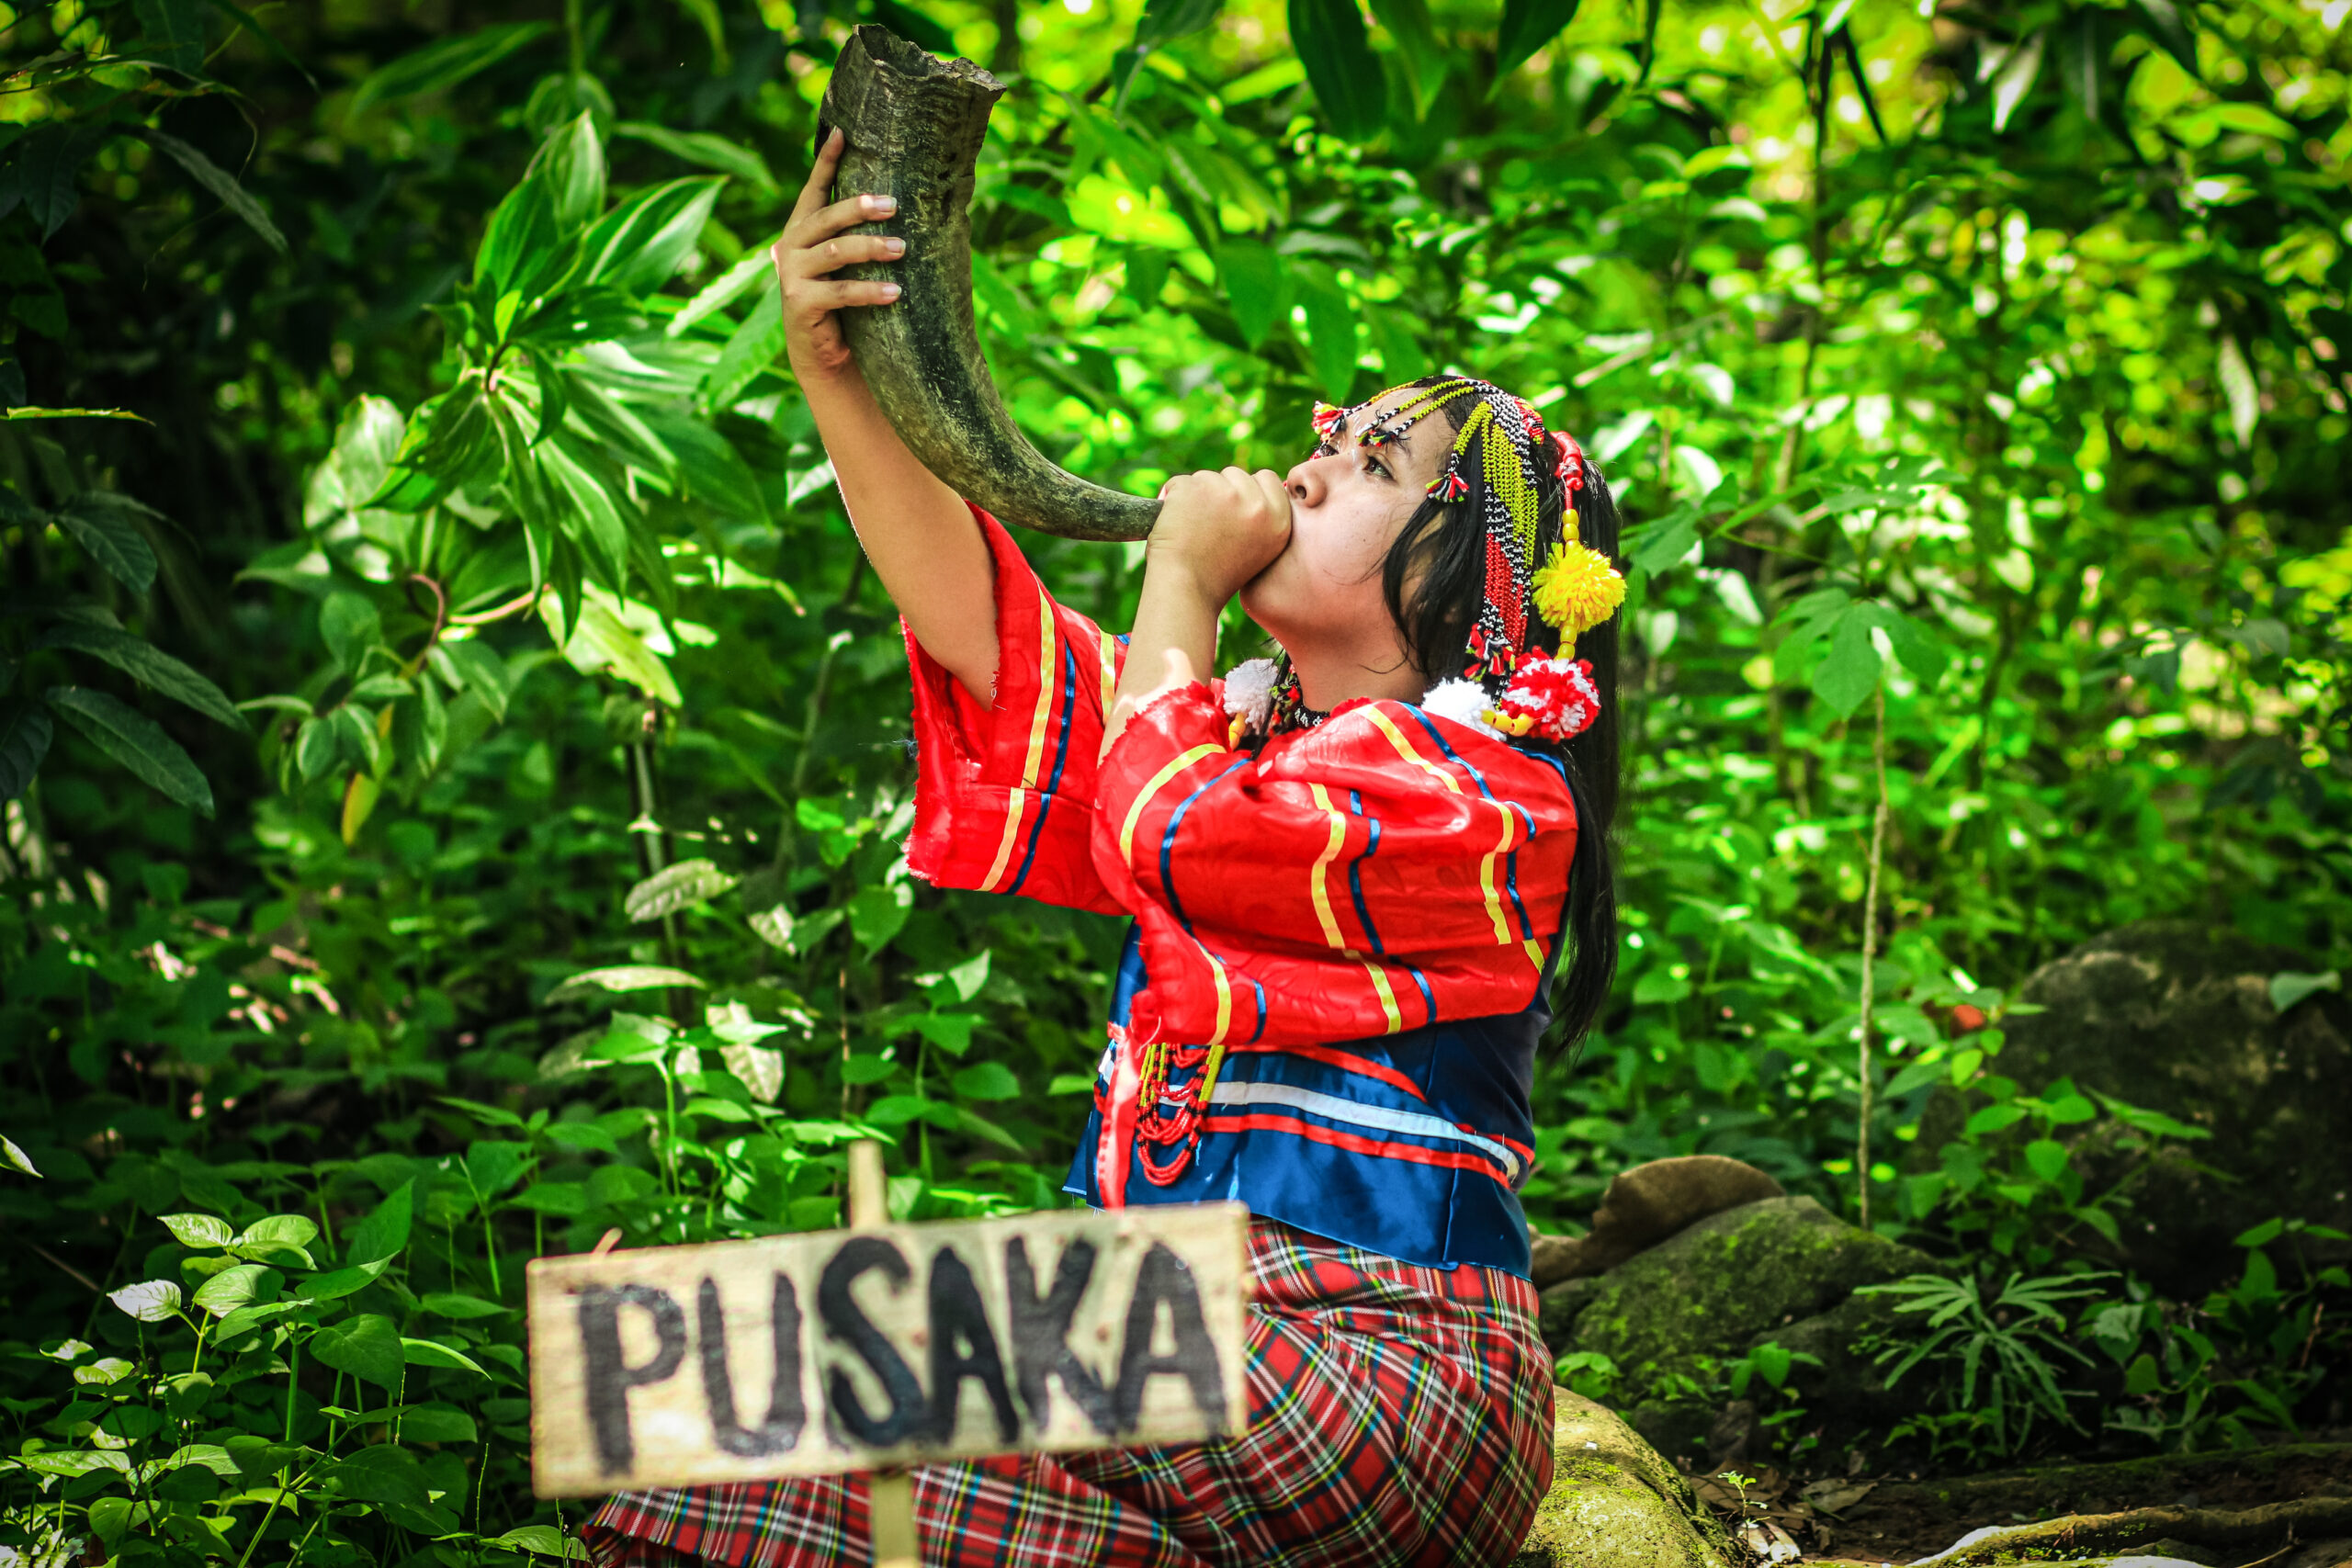 Young indigenous woman from the Obu Manuvu tribe of Indonesia holding a horn to call Pusaka, she is the spirit of the forest. 
The “Indigenous Innovative Solutions” Photography Contest Winners
Name of the photograph: Pusaka. Author: Prince Loyd C. Besorio